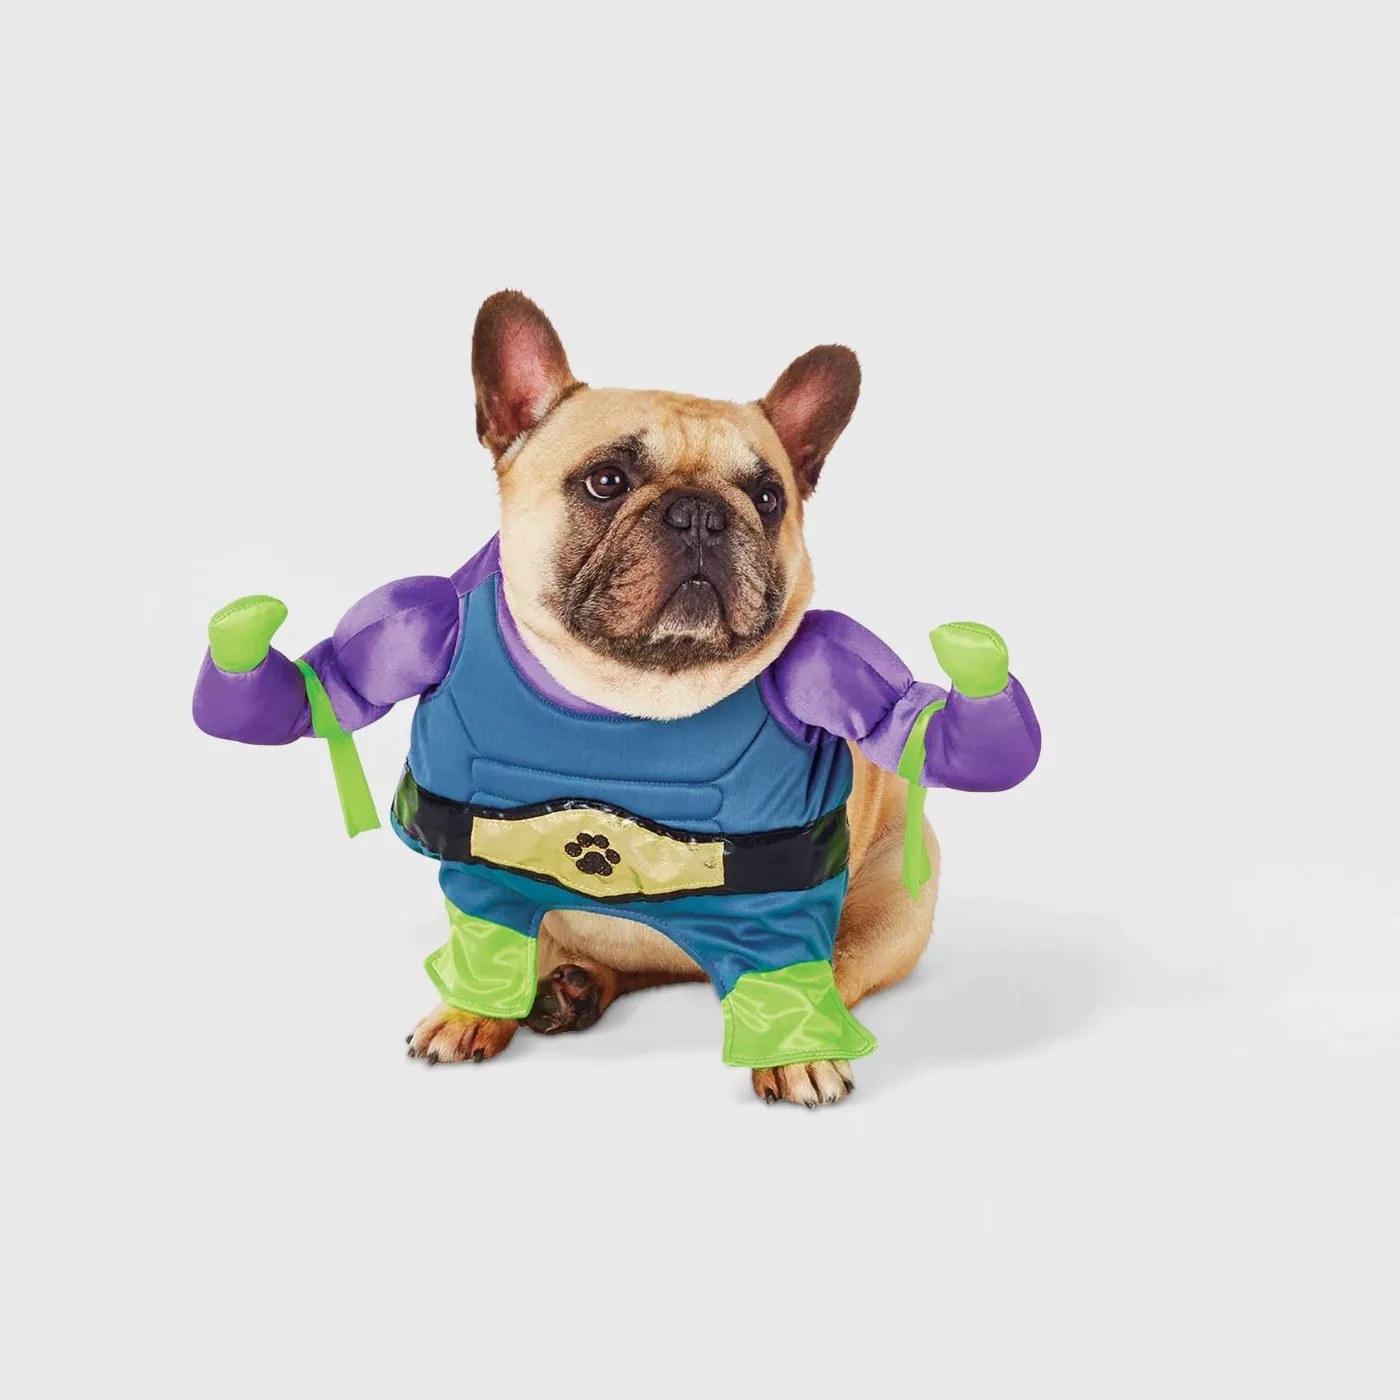 A dog wearing the wrestler costume